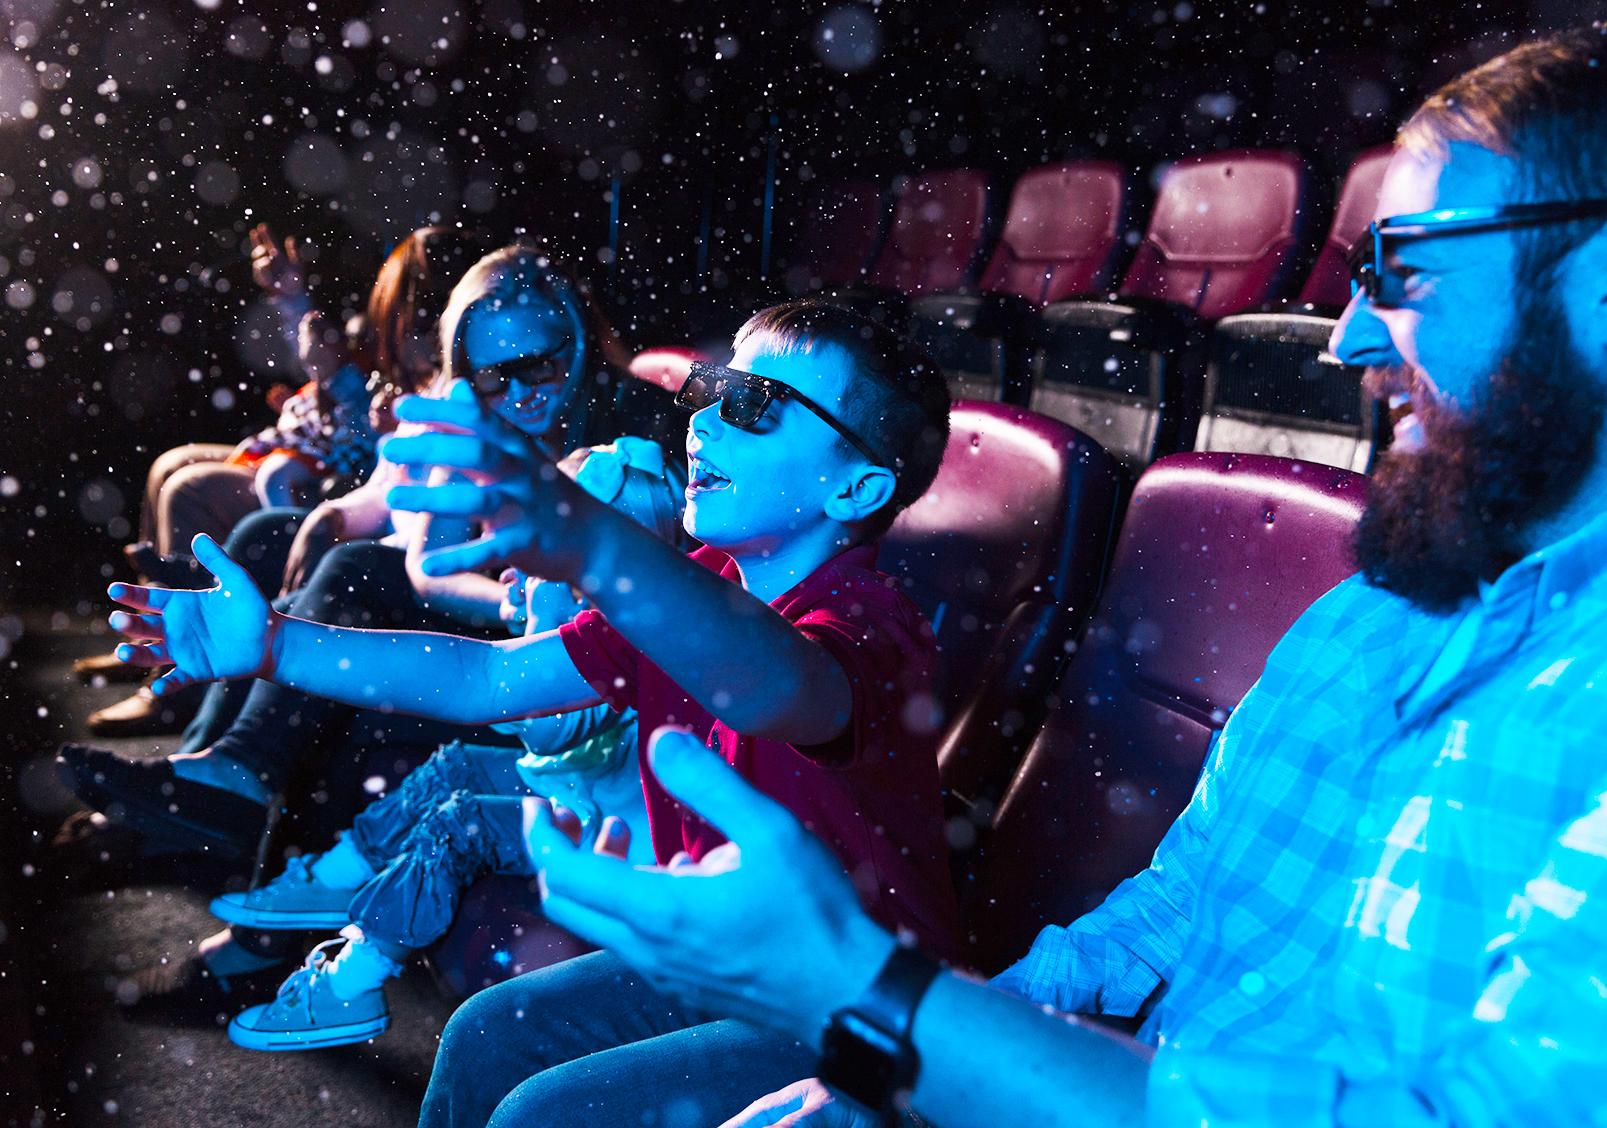 4D Theater, South Carolina State Museum, Snow, Open For Fun